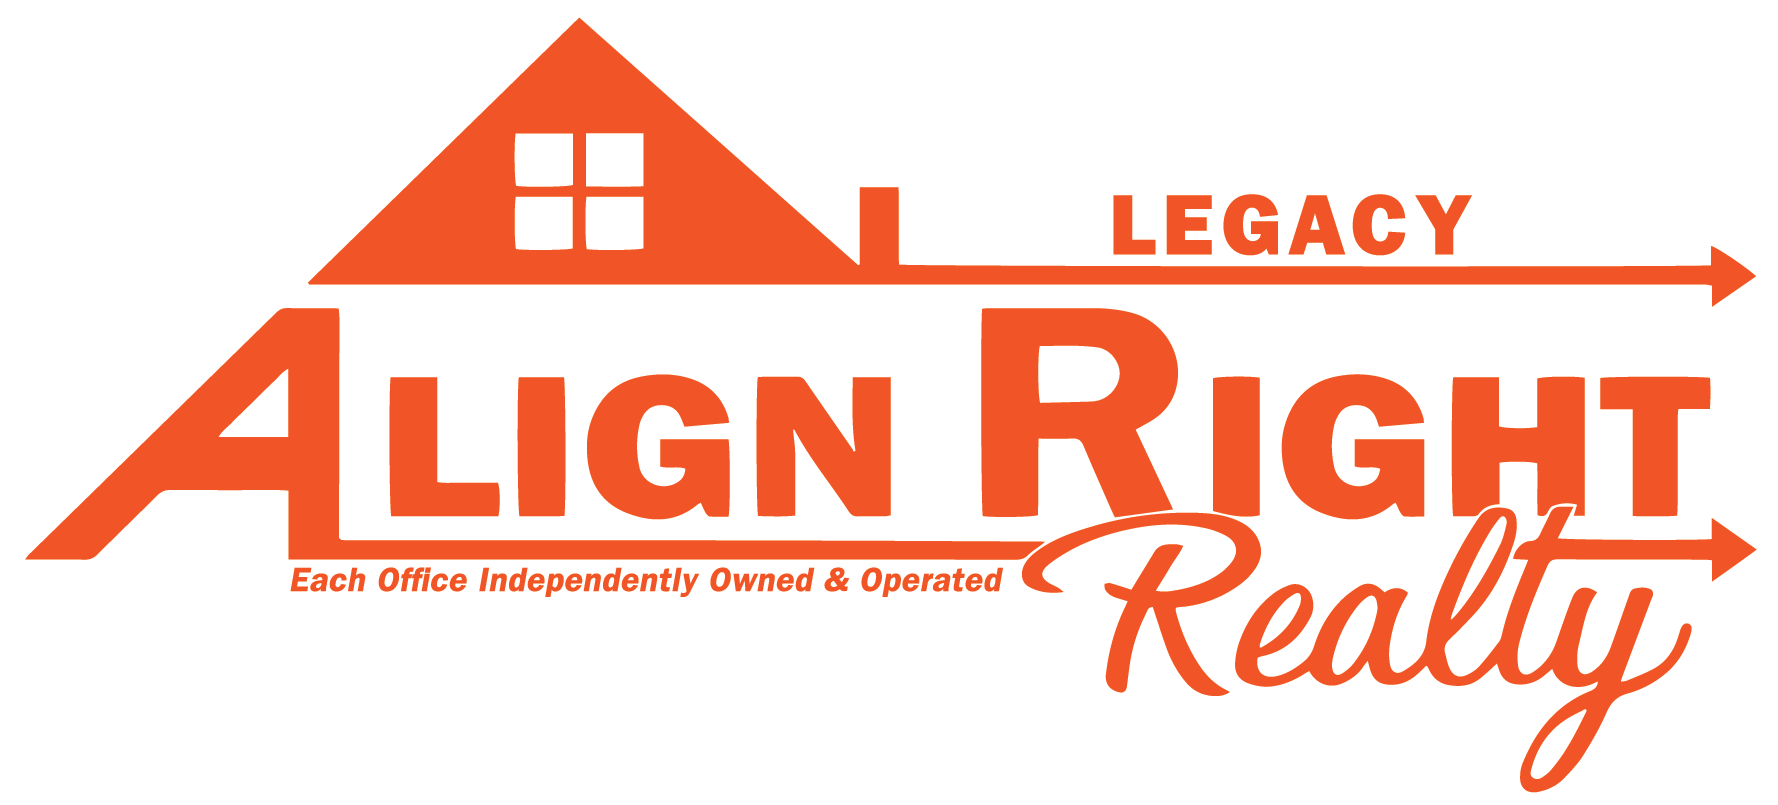 Align Right Realty Legacy